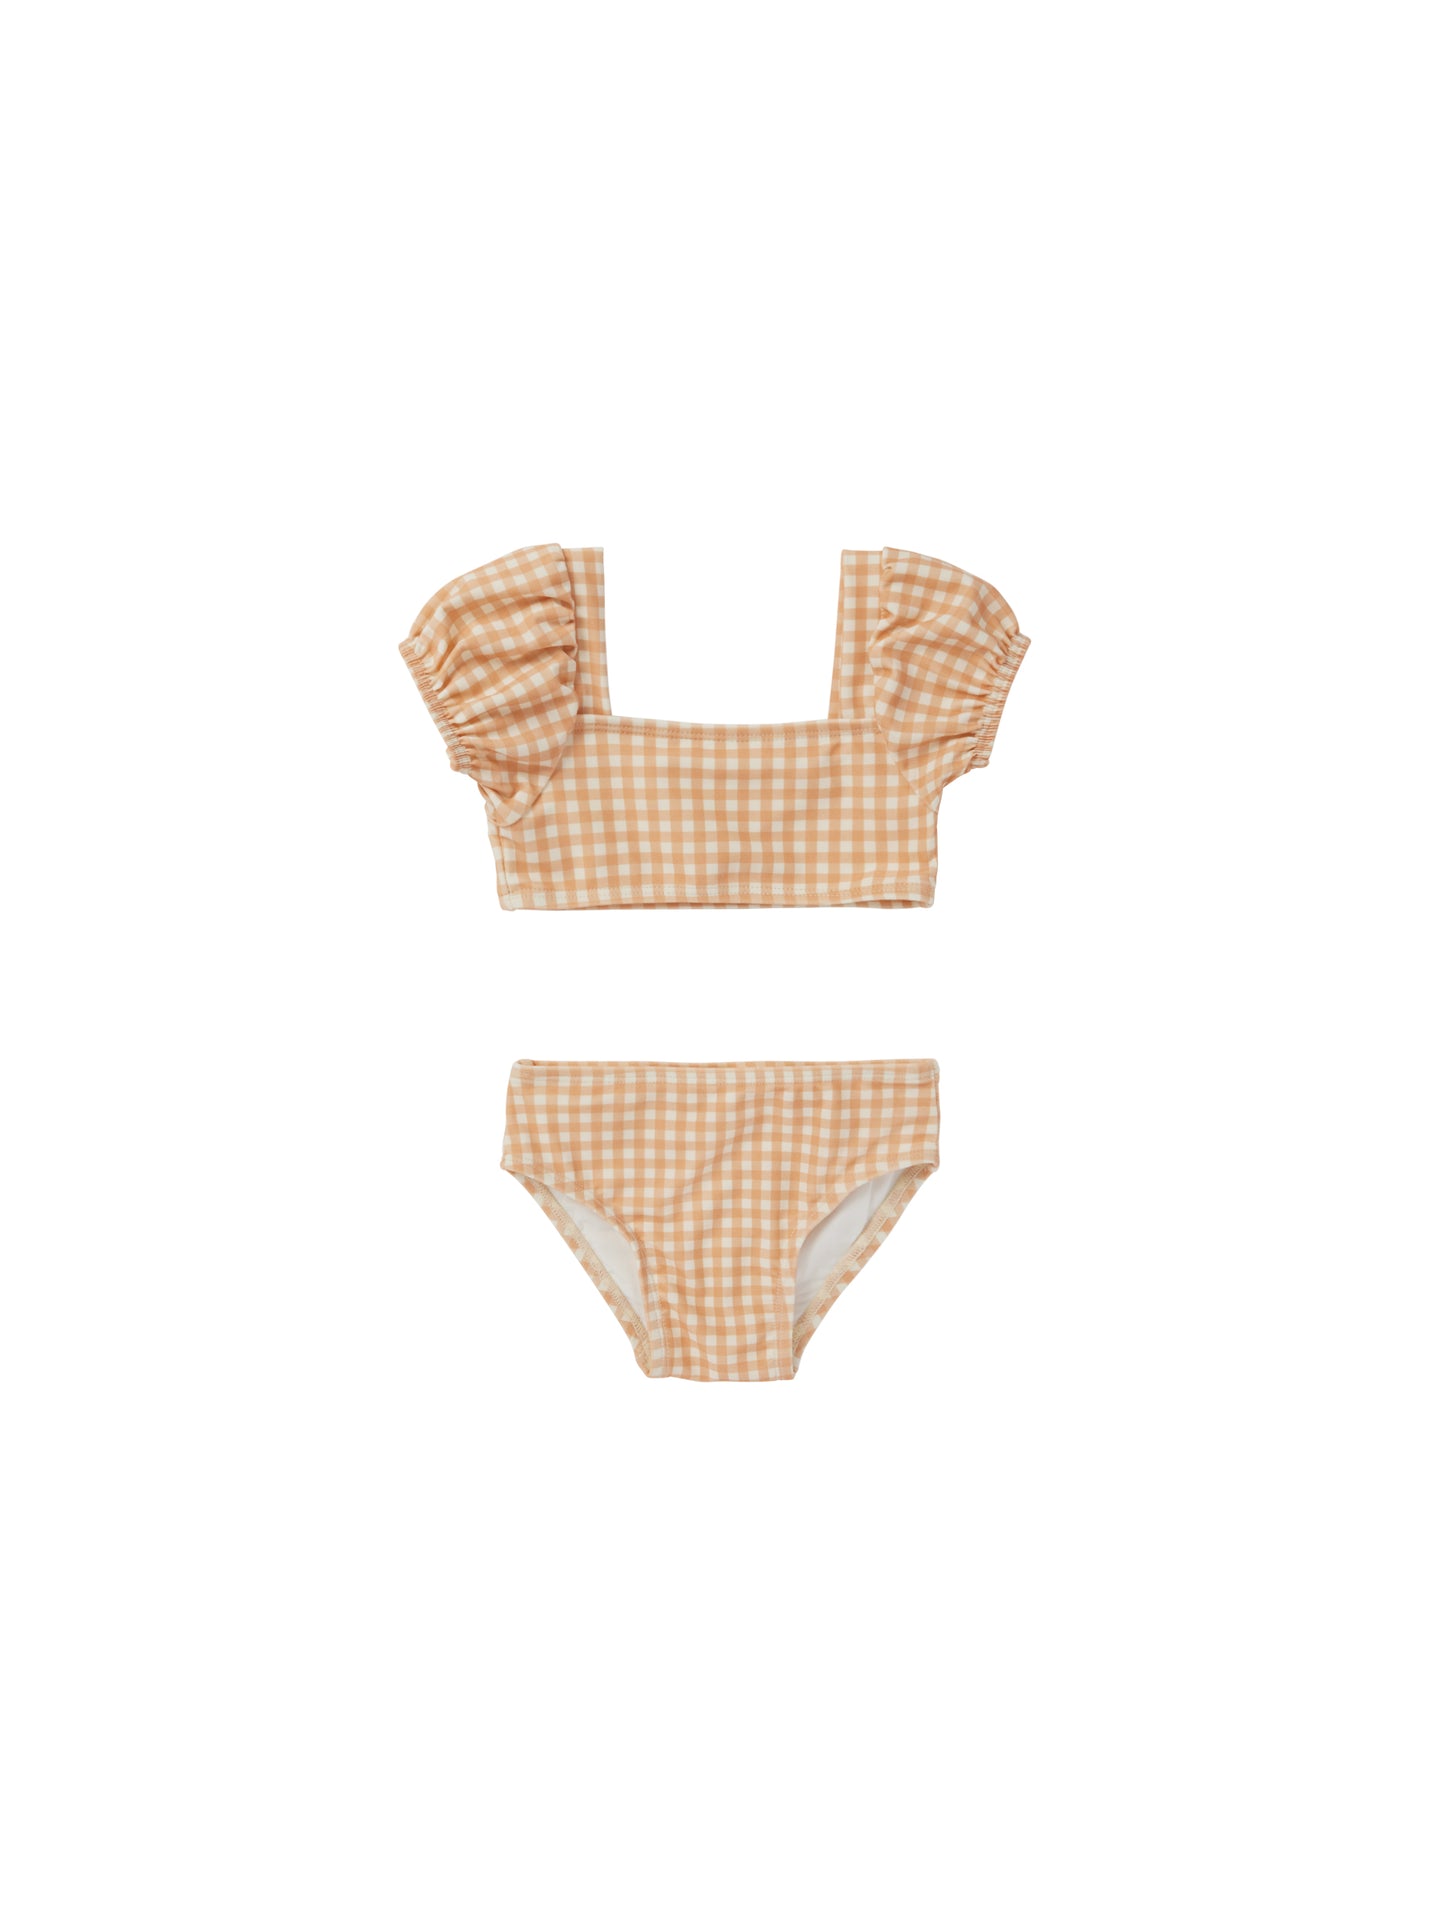 Quincy Mae - Ziggy Two-Piece - Melon Gingham